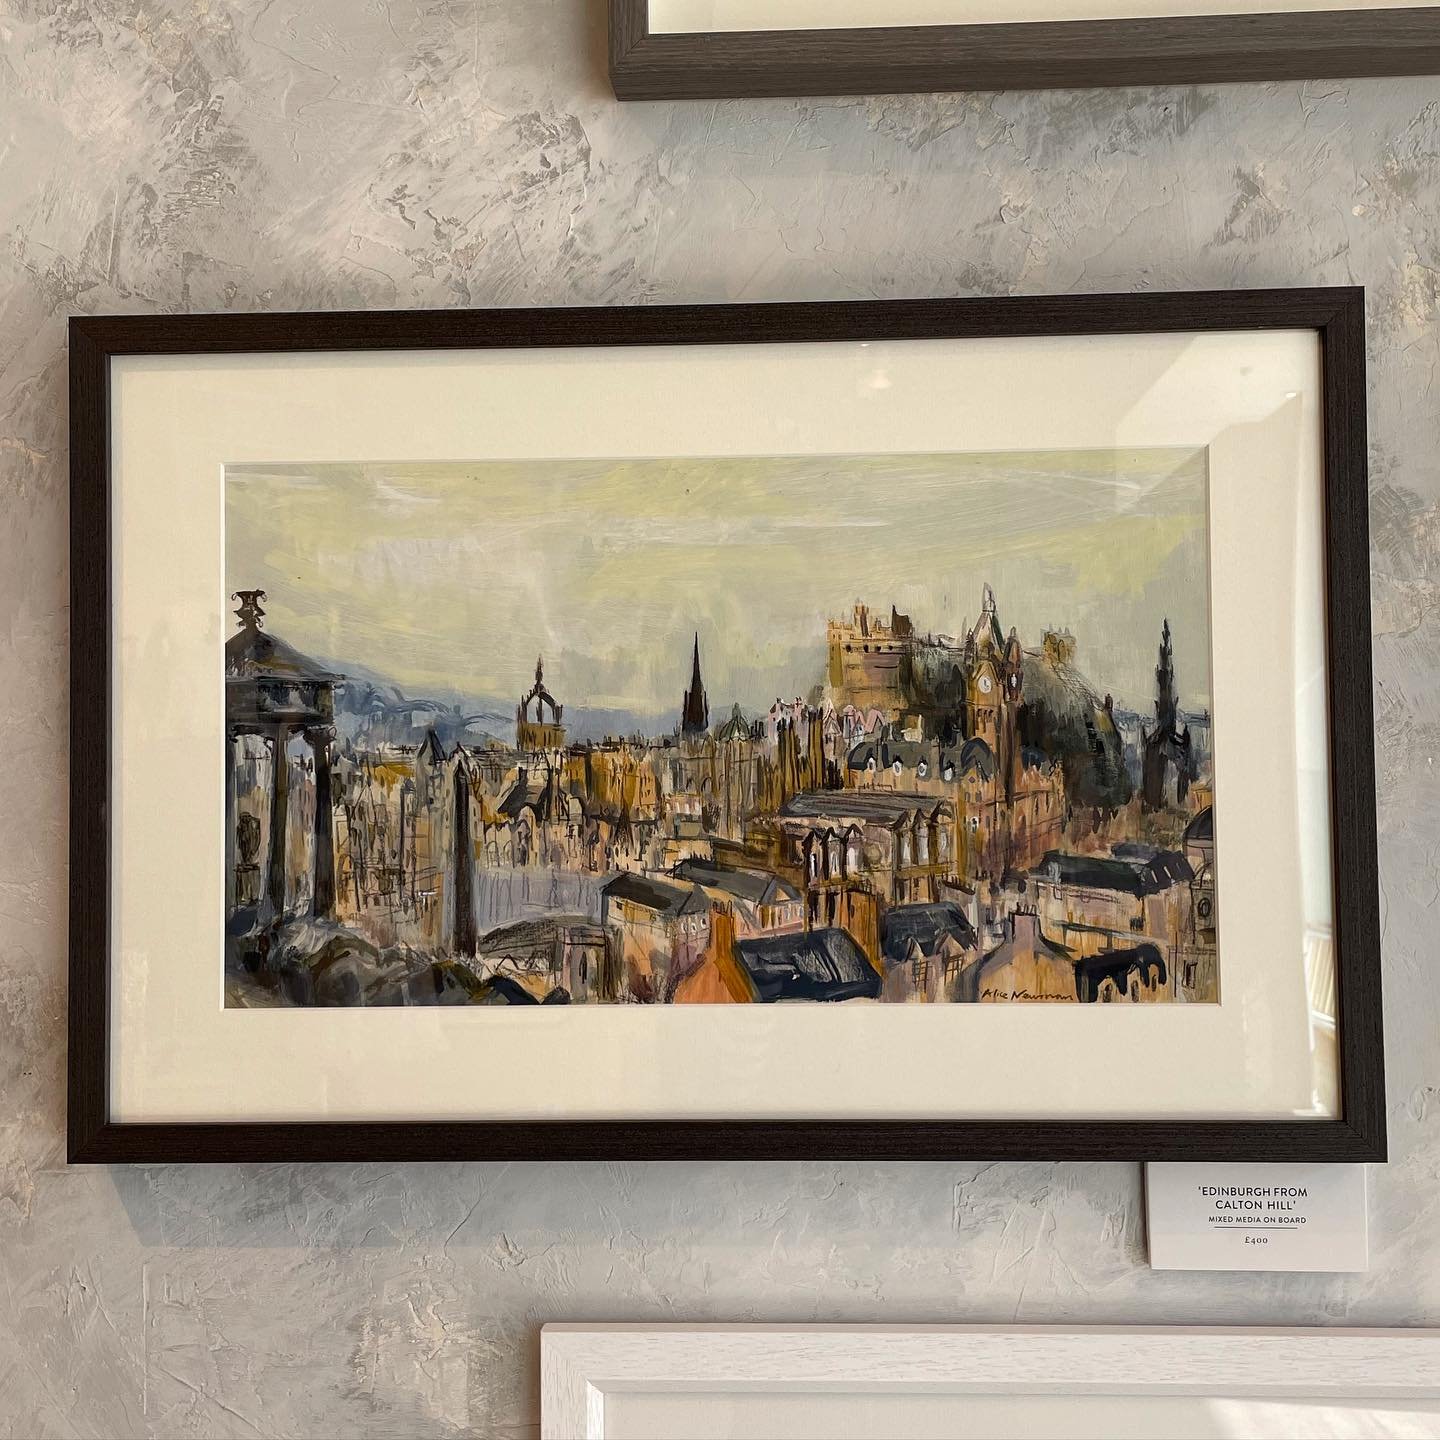 Remember this piece I painted up on Calton Hill a few weeks ago? Well she&rsquo;s back from the framers and now available at my exhibition in Anthropologie, on George st. 

All the work from my exhibition is available to purchase through my website, 